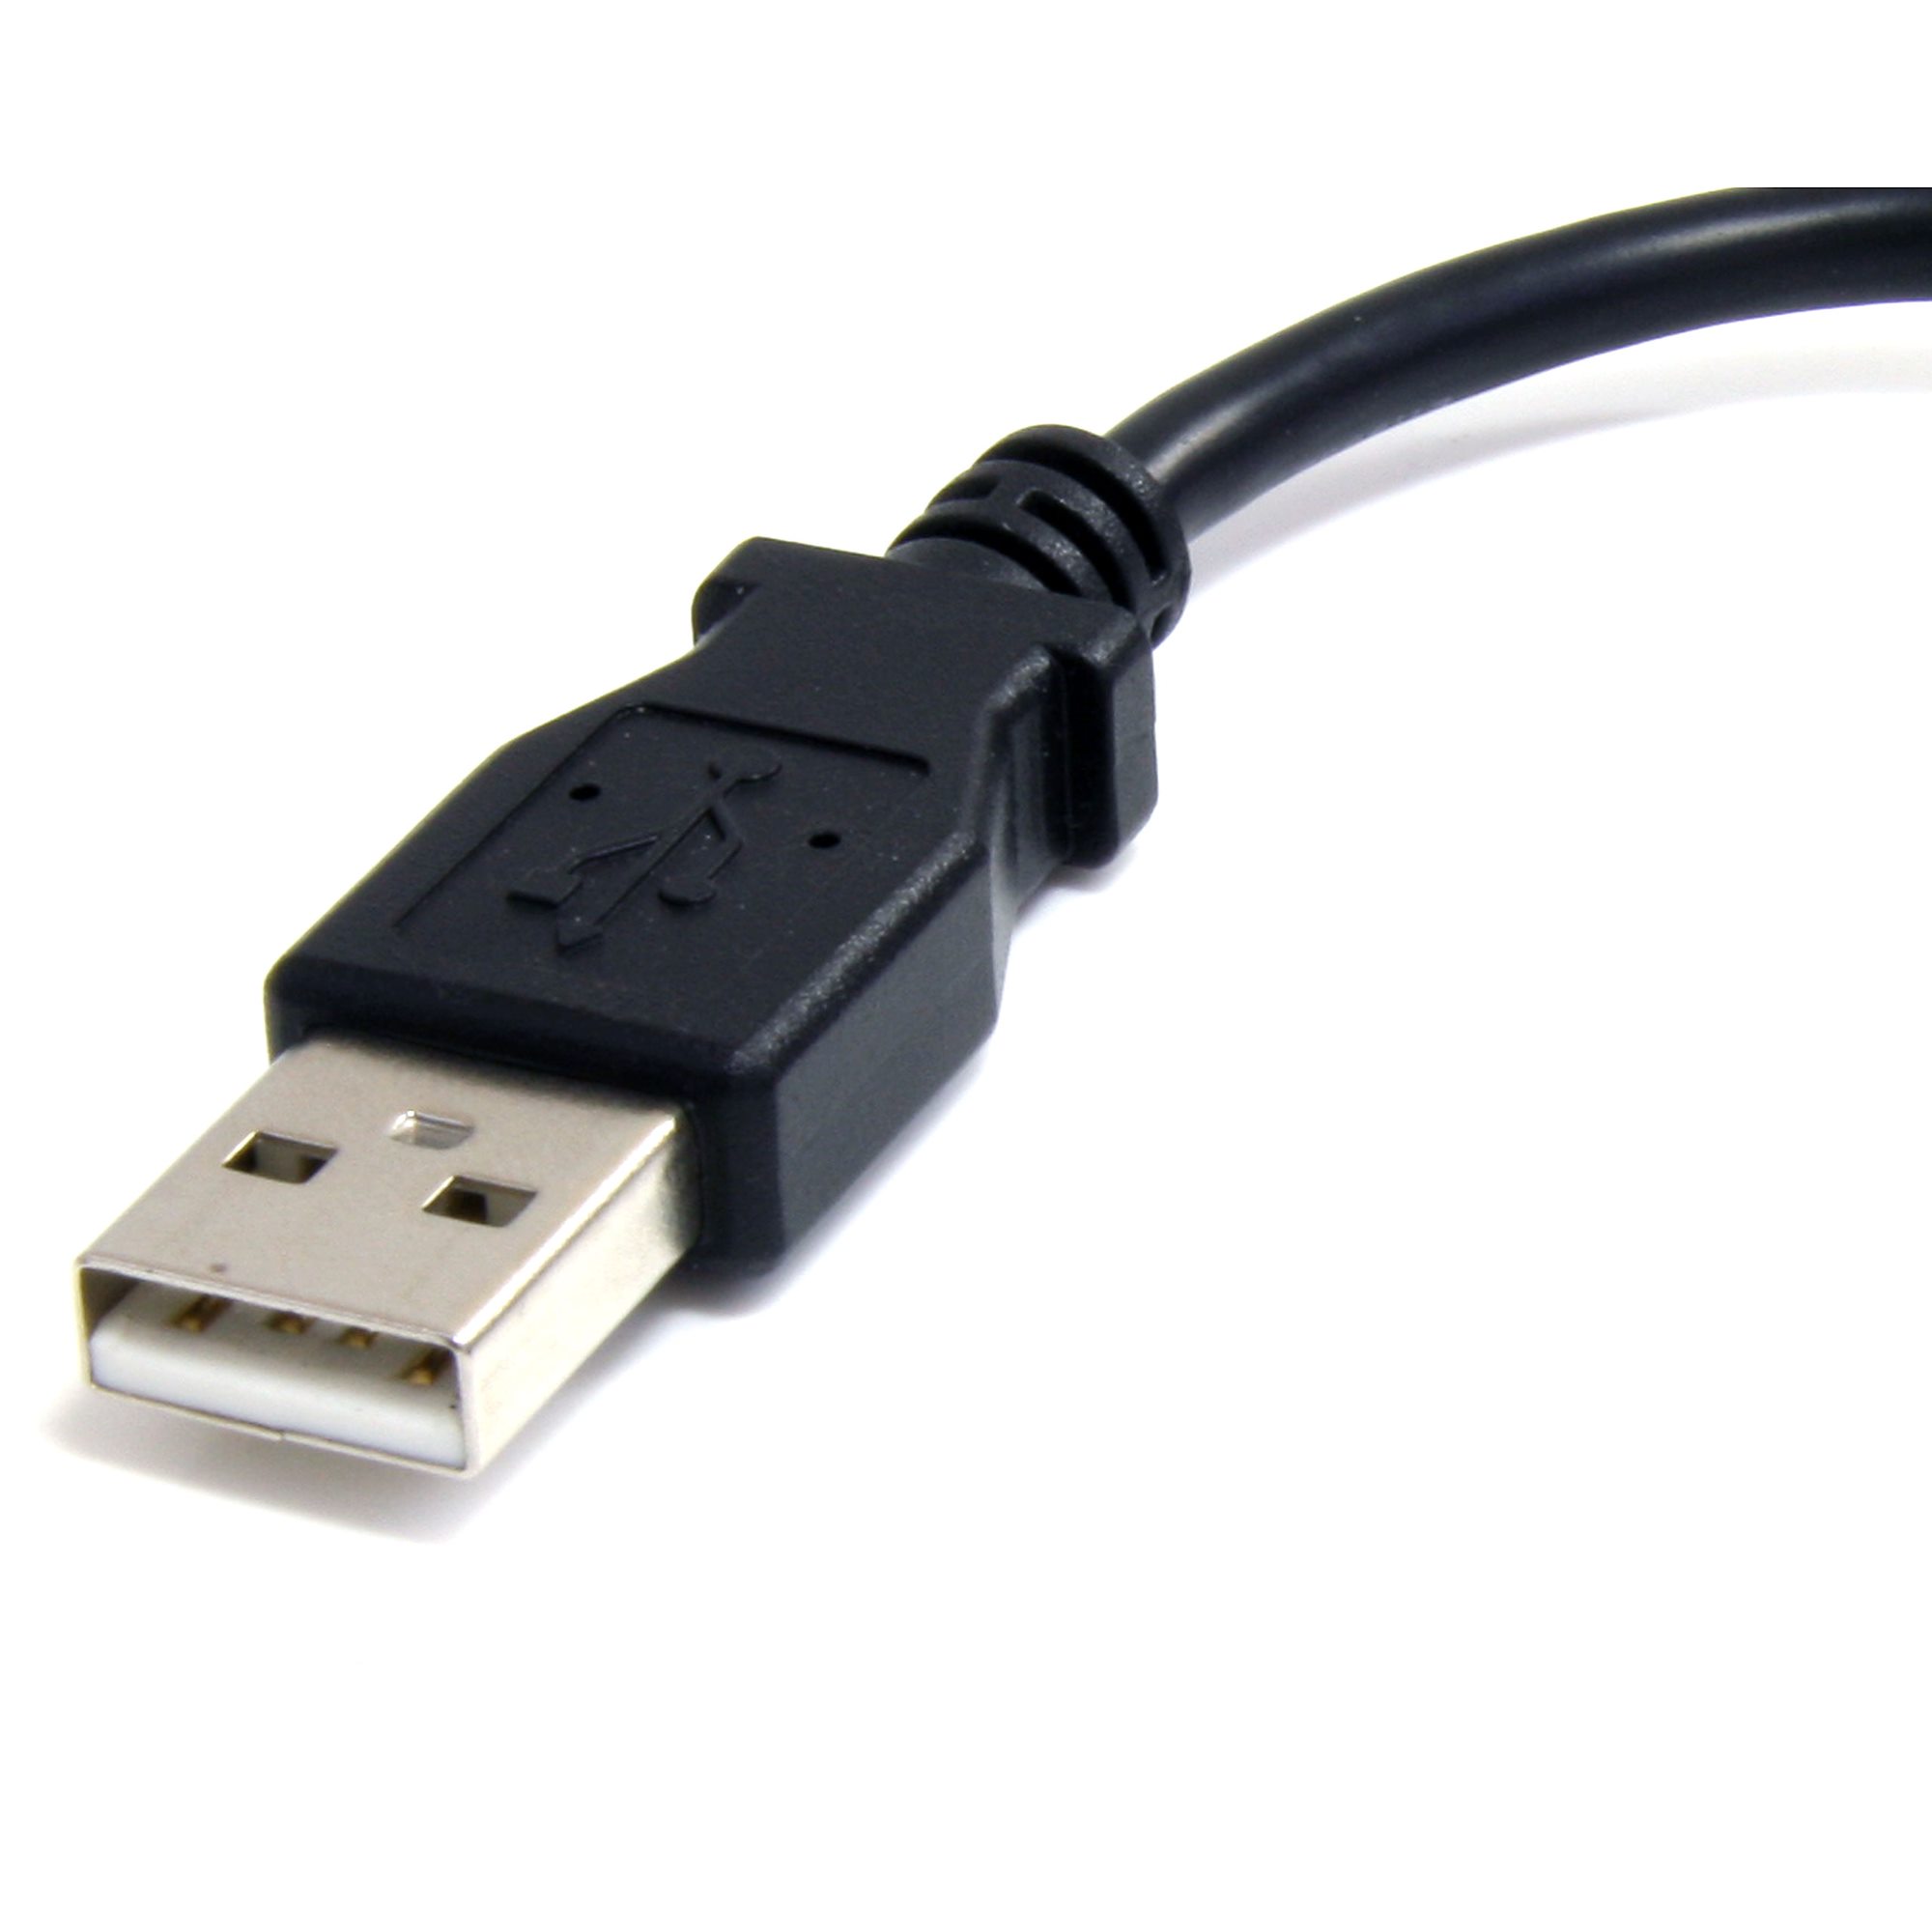 New 6FT Black USB Cable 2.0 A to Micro-USB B High Speed USB Cable M to Male AD 